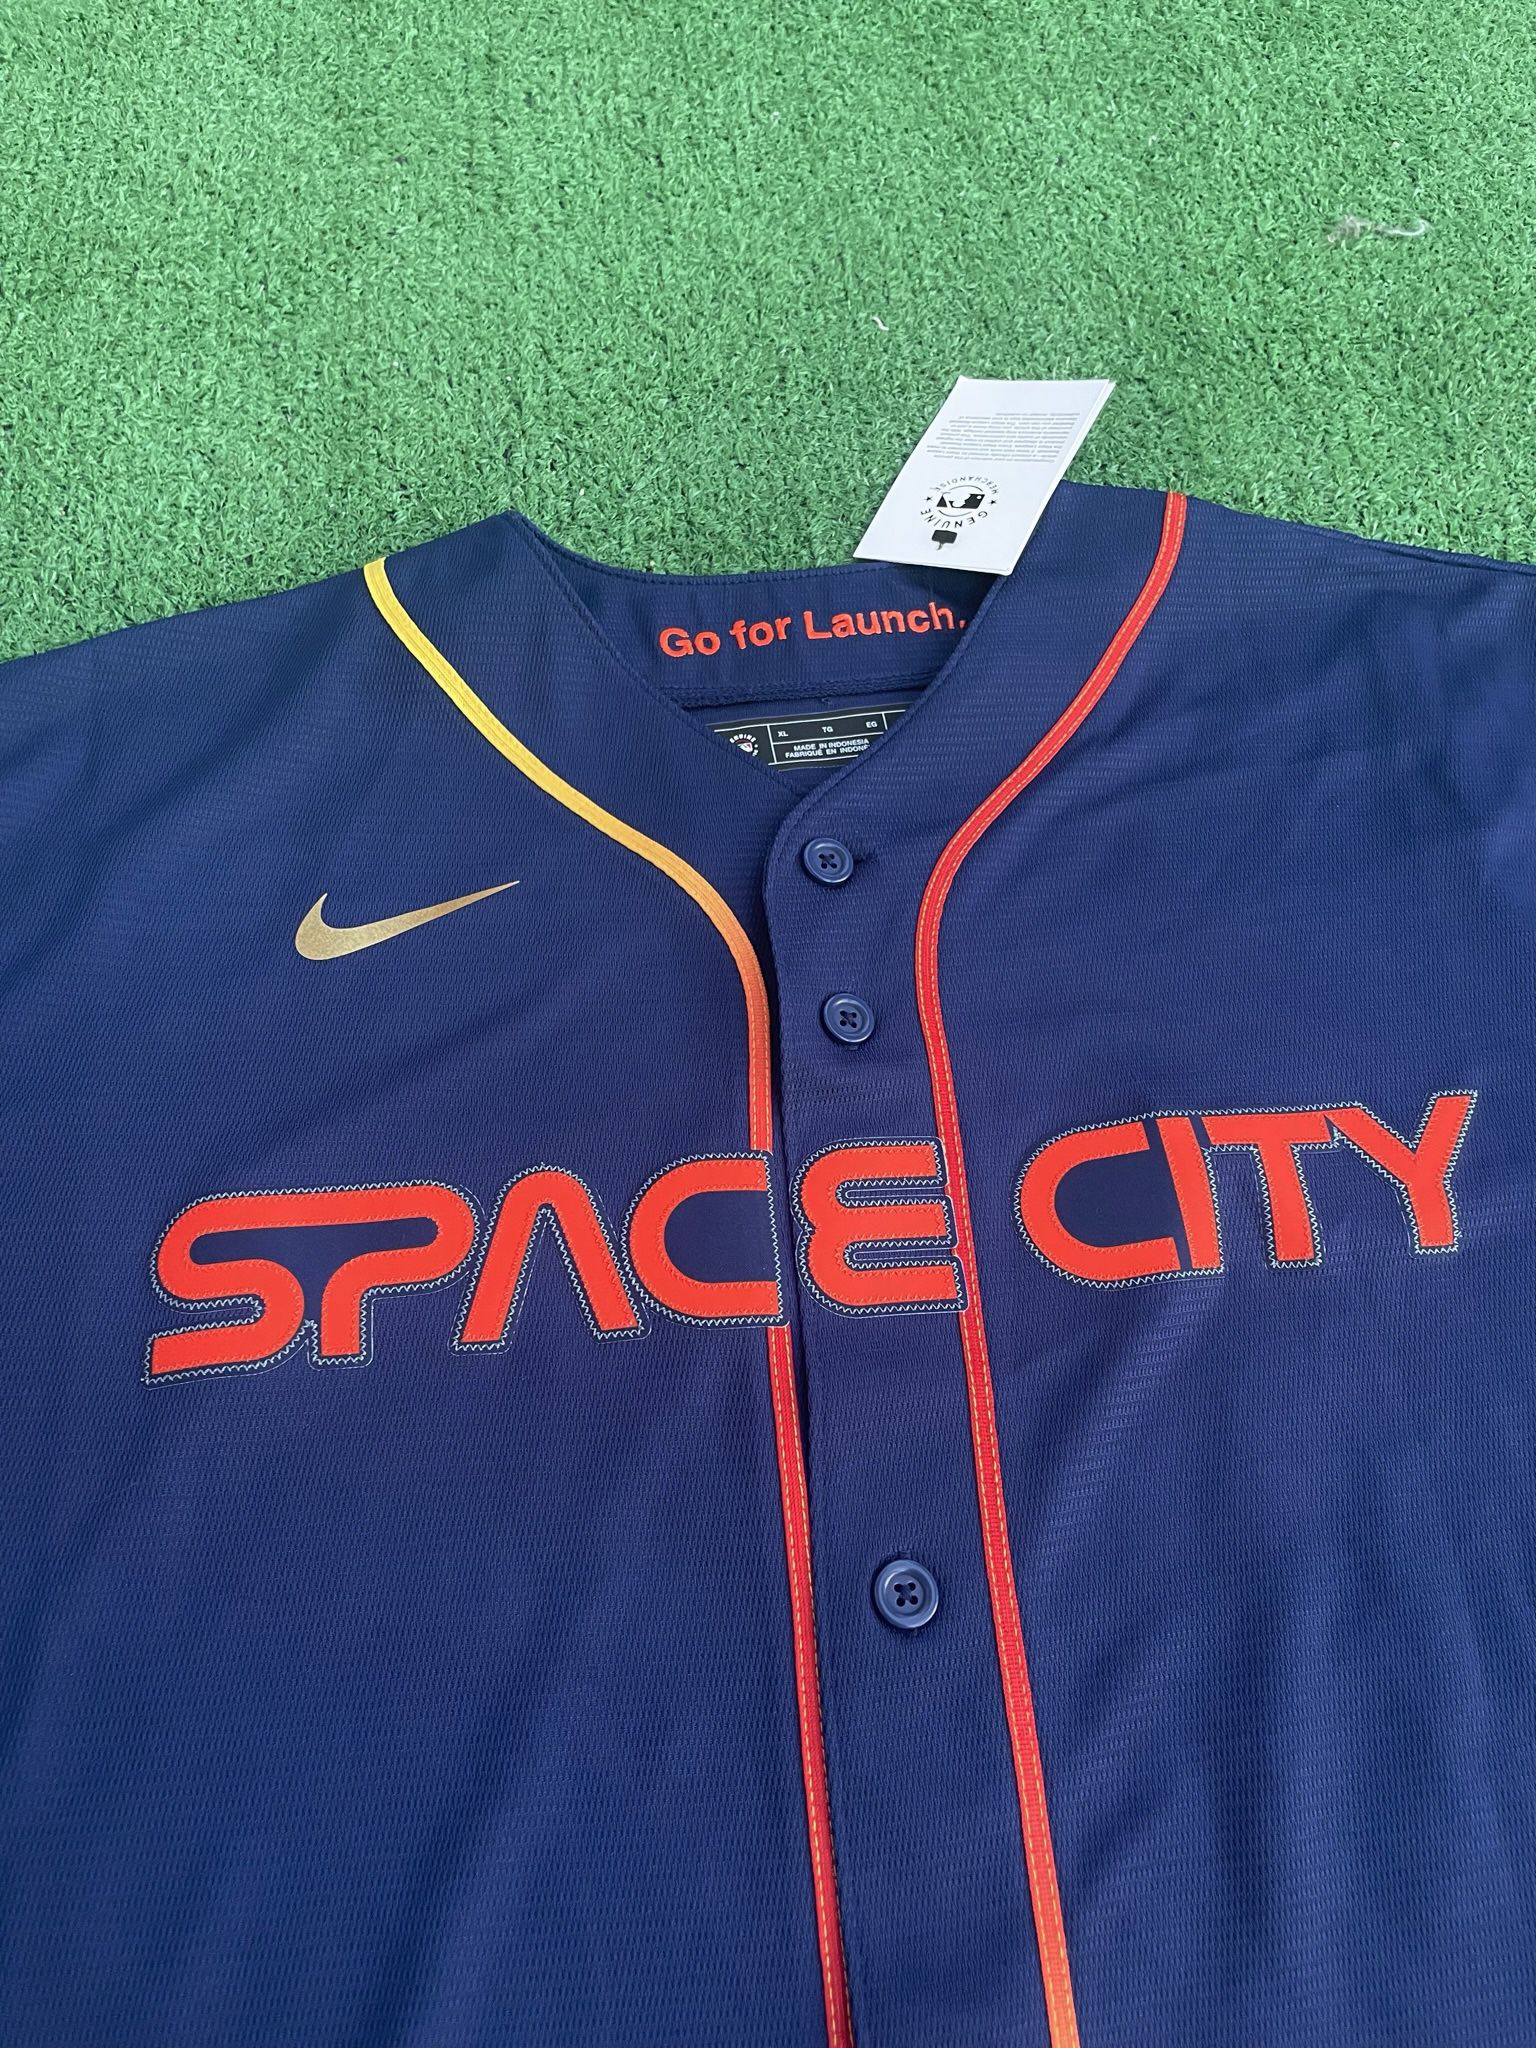 Nike Houston Astros Jersey Space City XXL for Sale in Richmond, TX - OfferUp